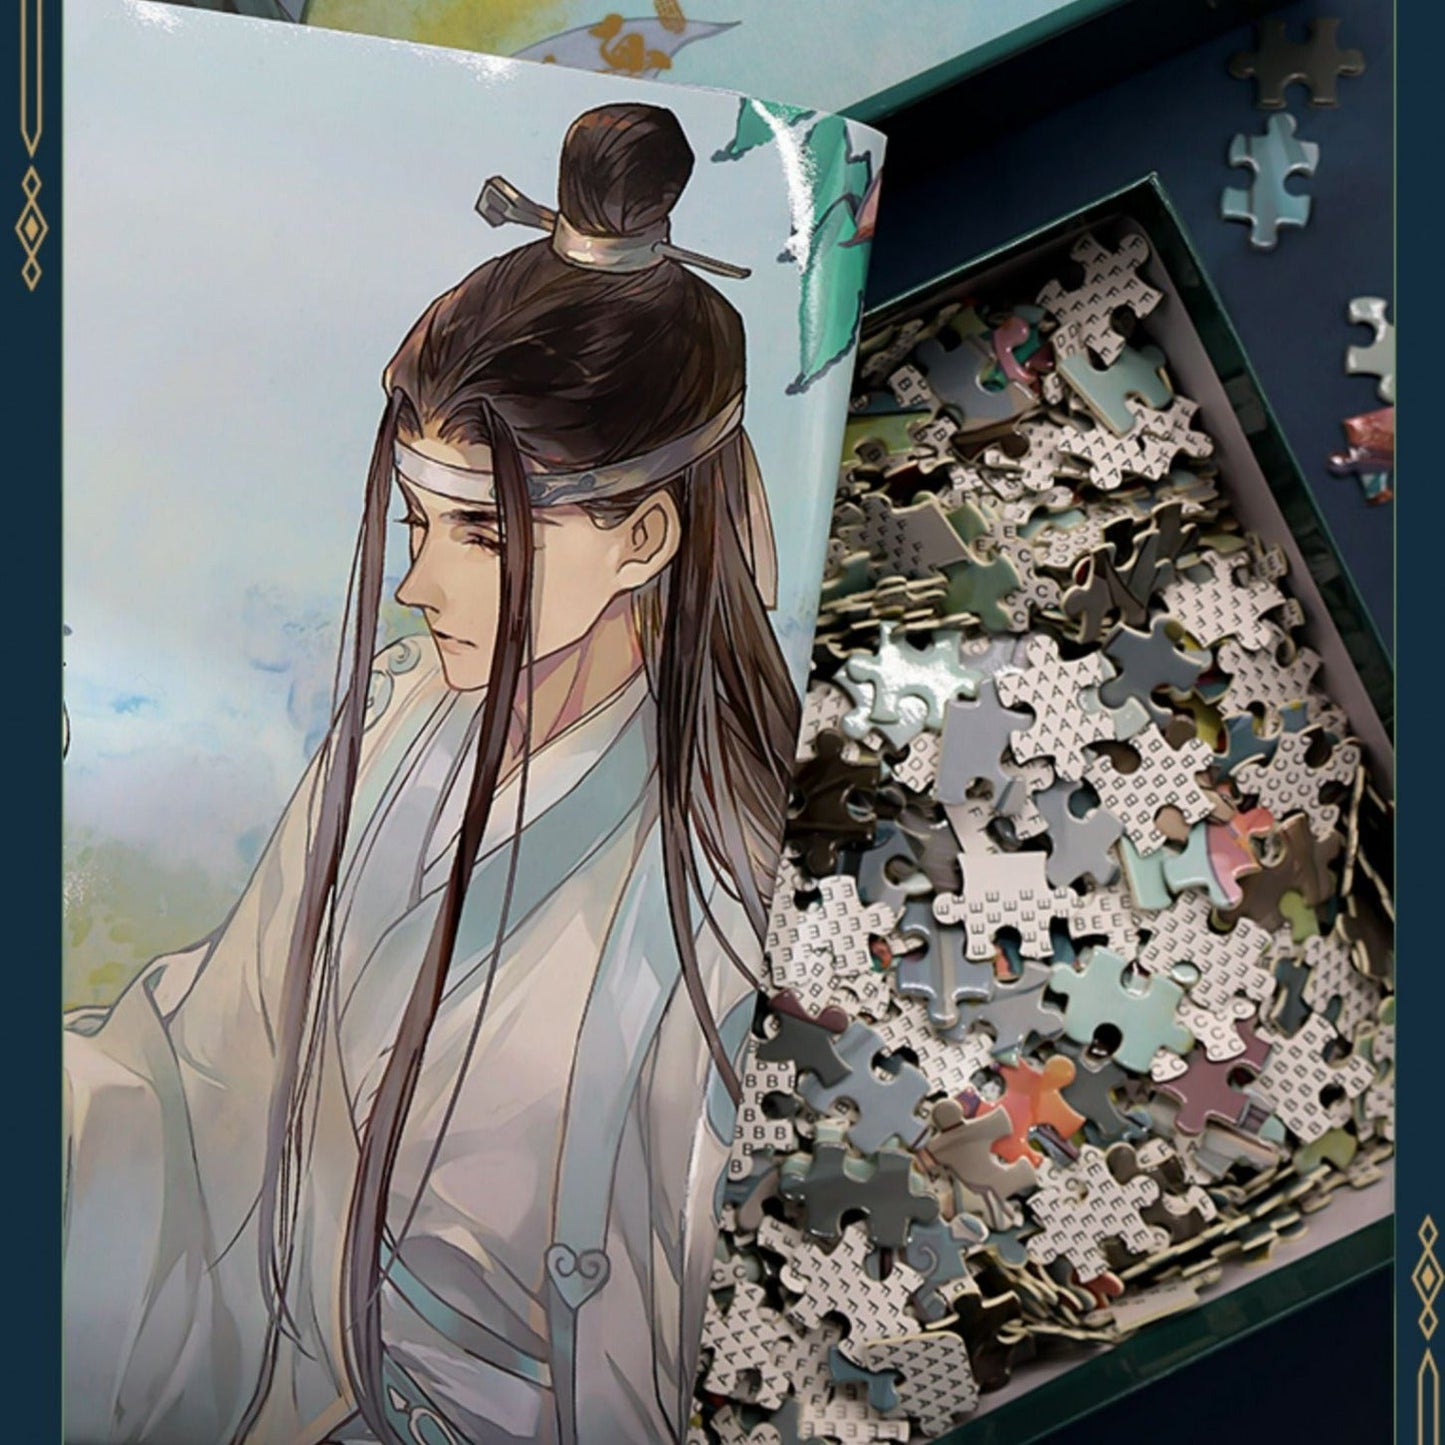 MDZS 24 Solar Terms Puzzle Posters 16818:401001